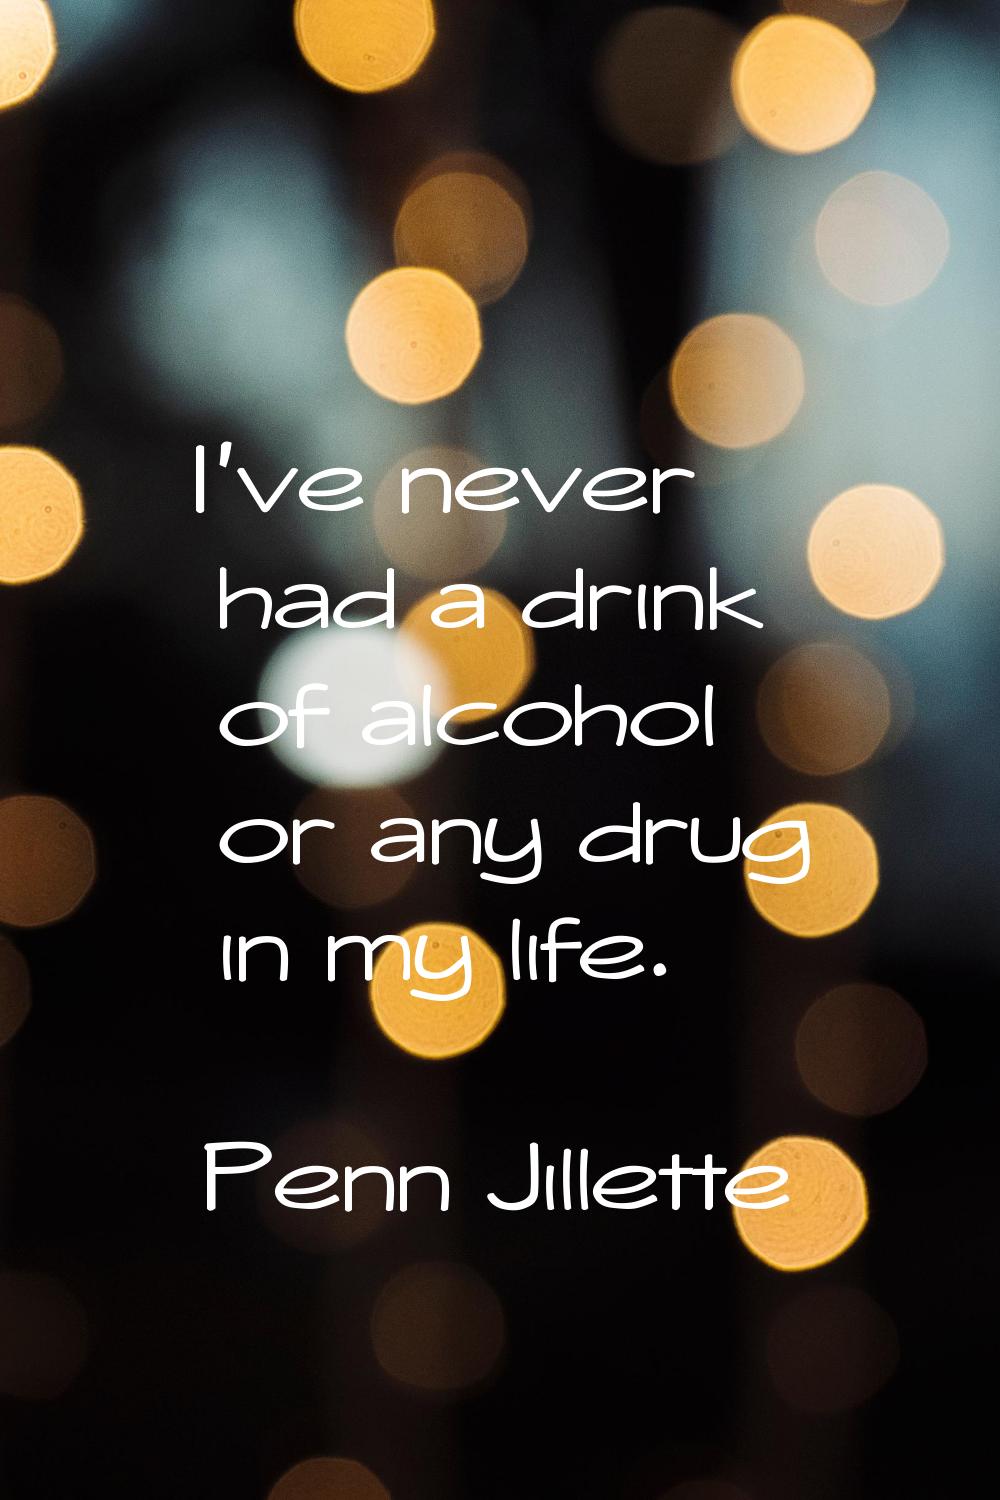 I've never had a drink of alcohol or any drug in my life.